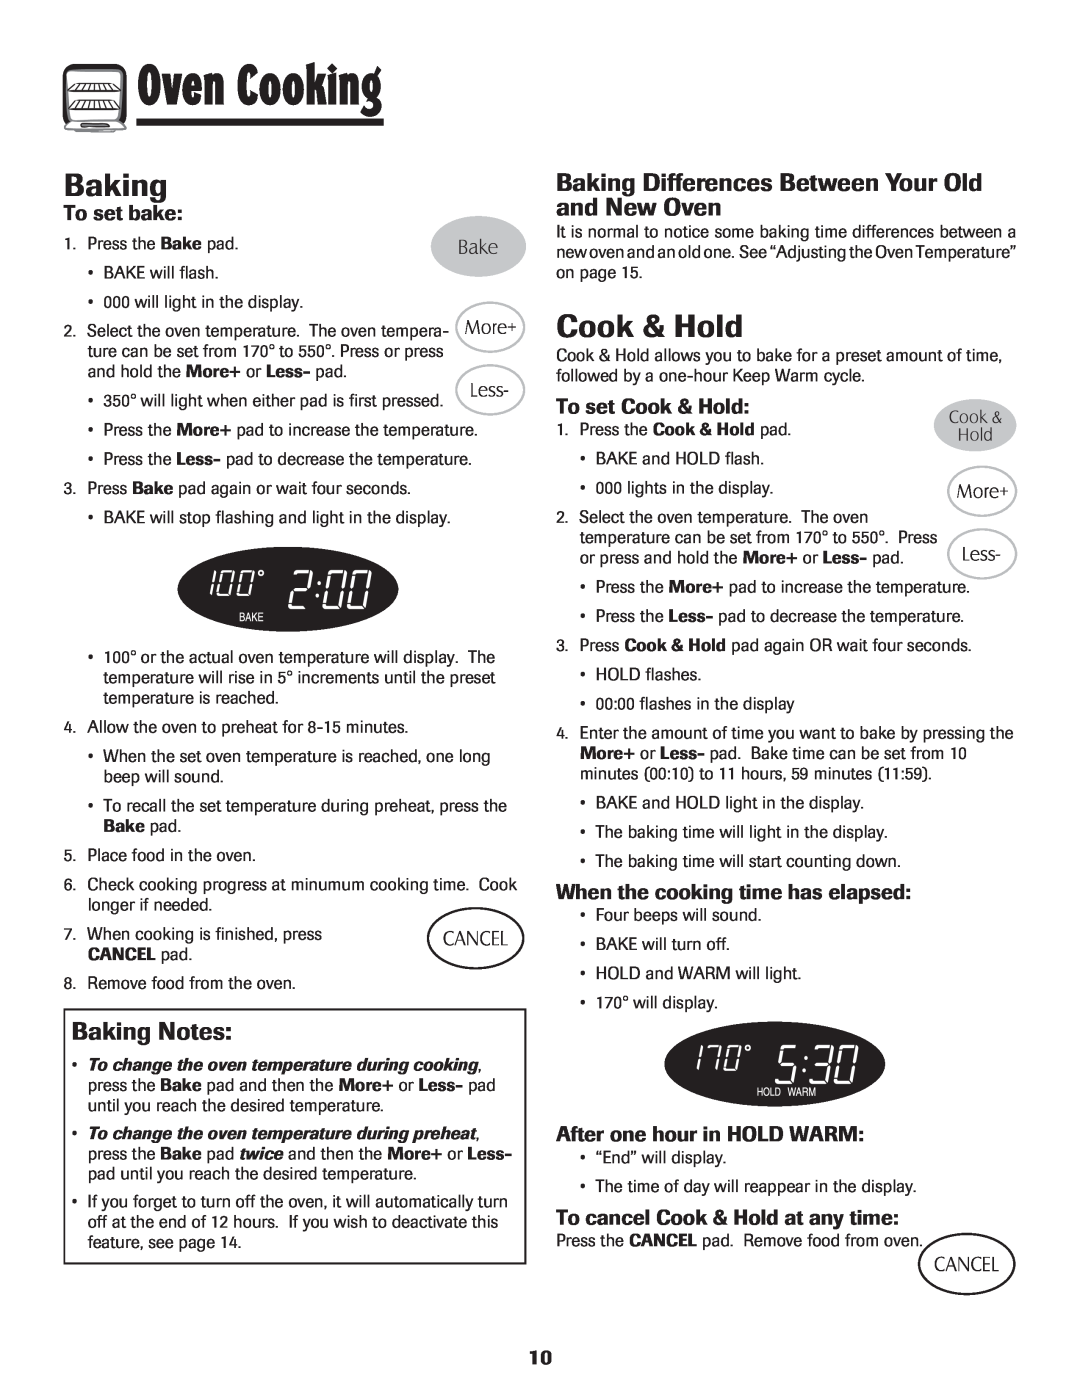 Maytag Range Cook & Hold, Baking Notes, Baking Differences Between Your Old and New Oven, To set bake, Oven Cooking 